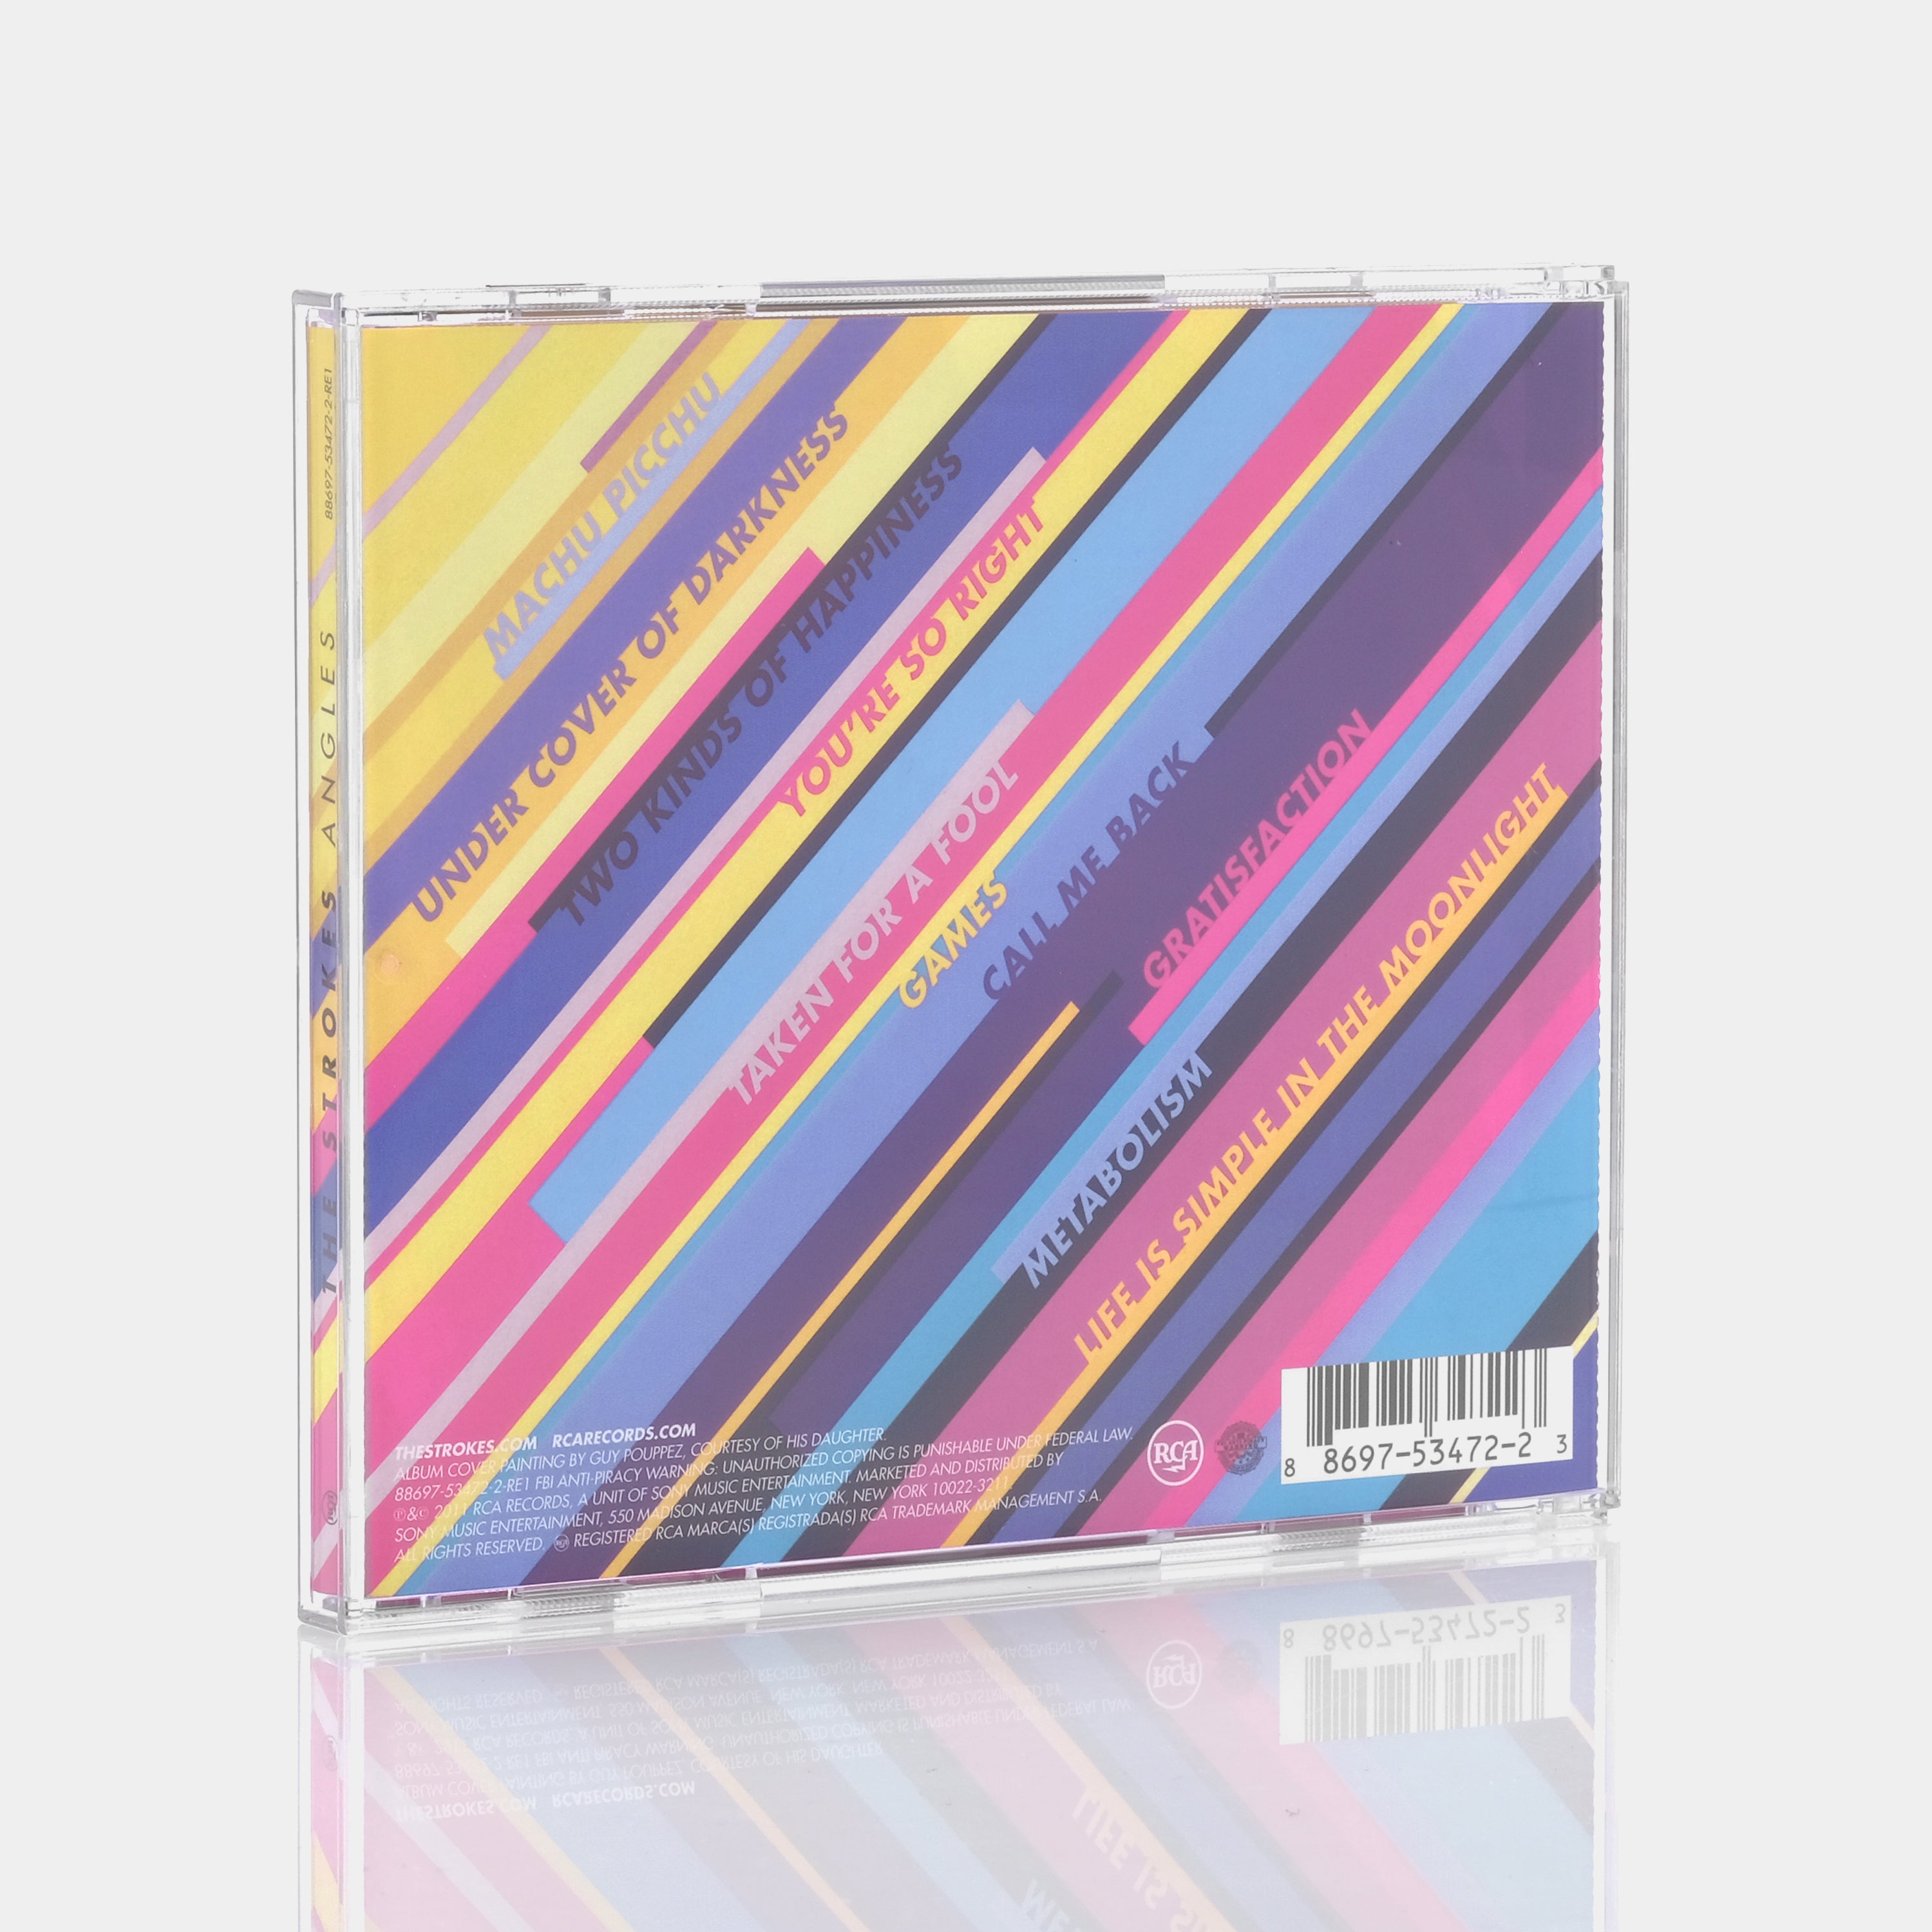 The Strokes - Angles CD